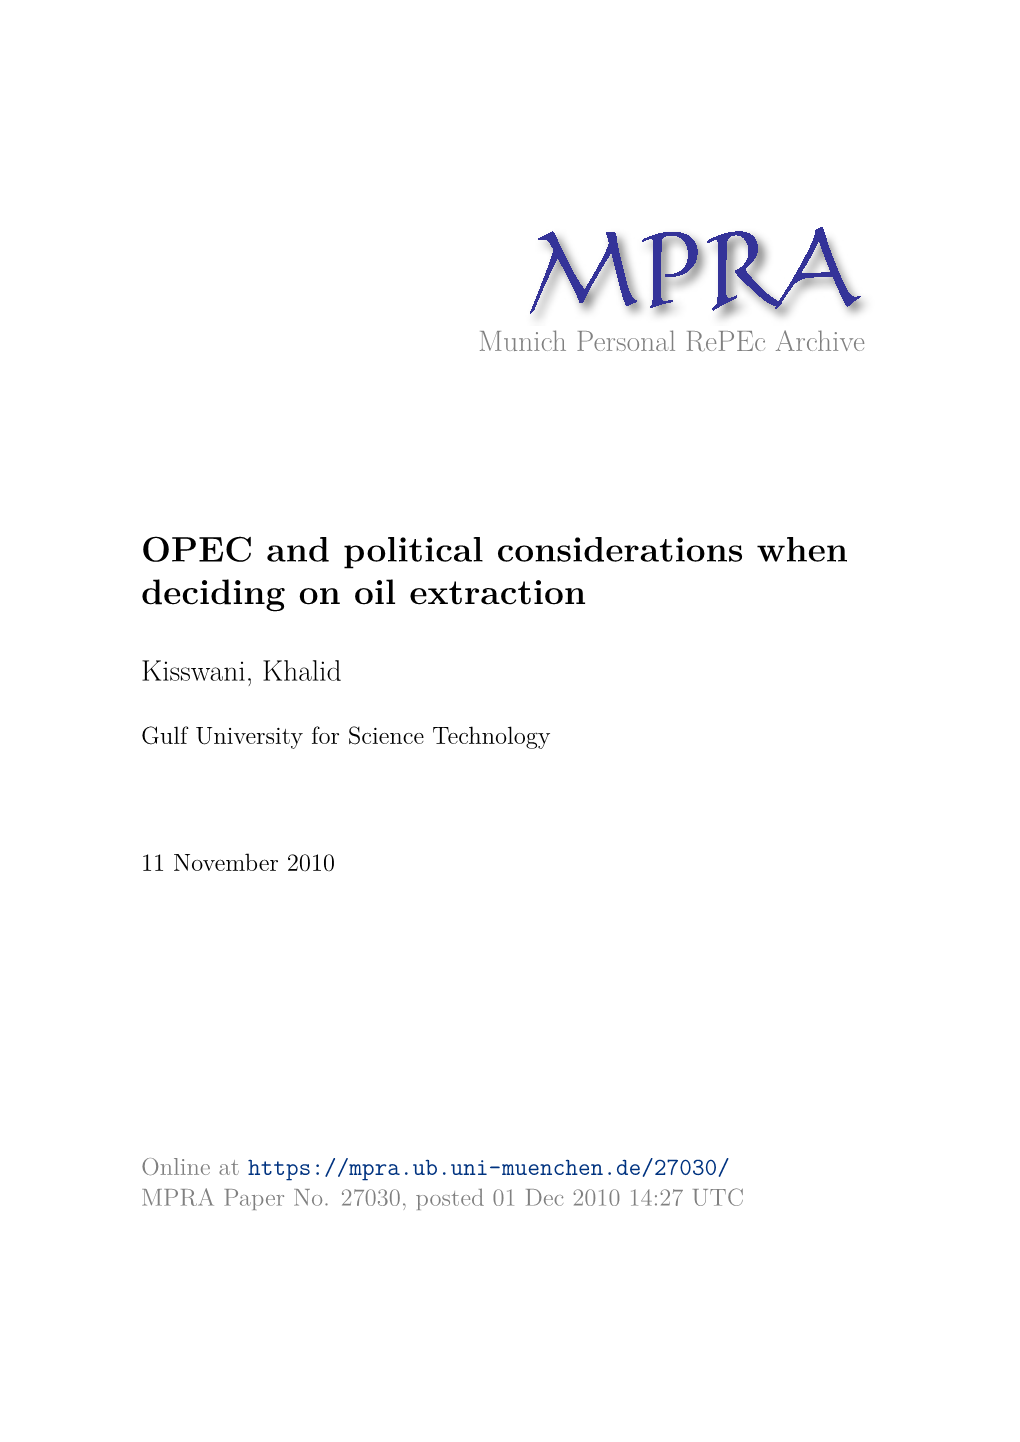 OPEC and Political Considerations When Deciding on Oil Extraction